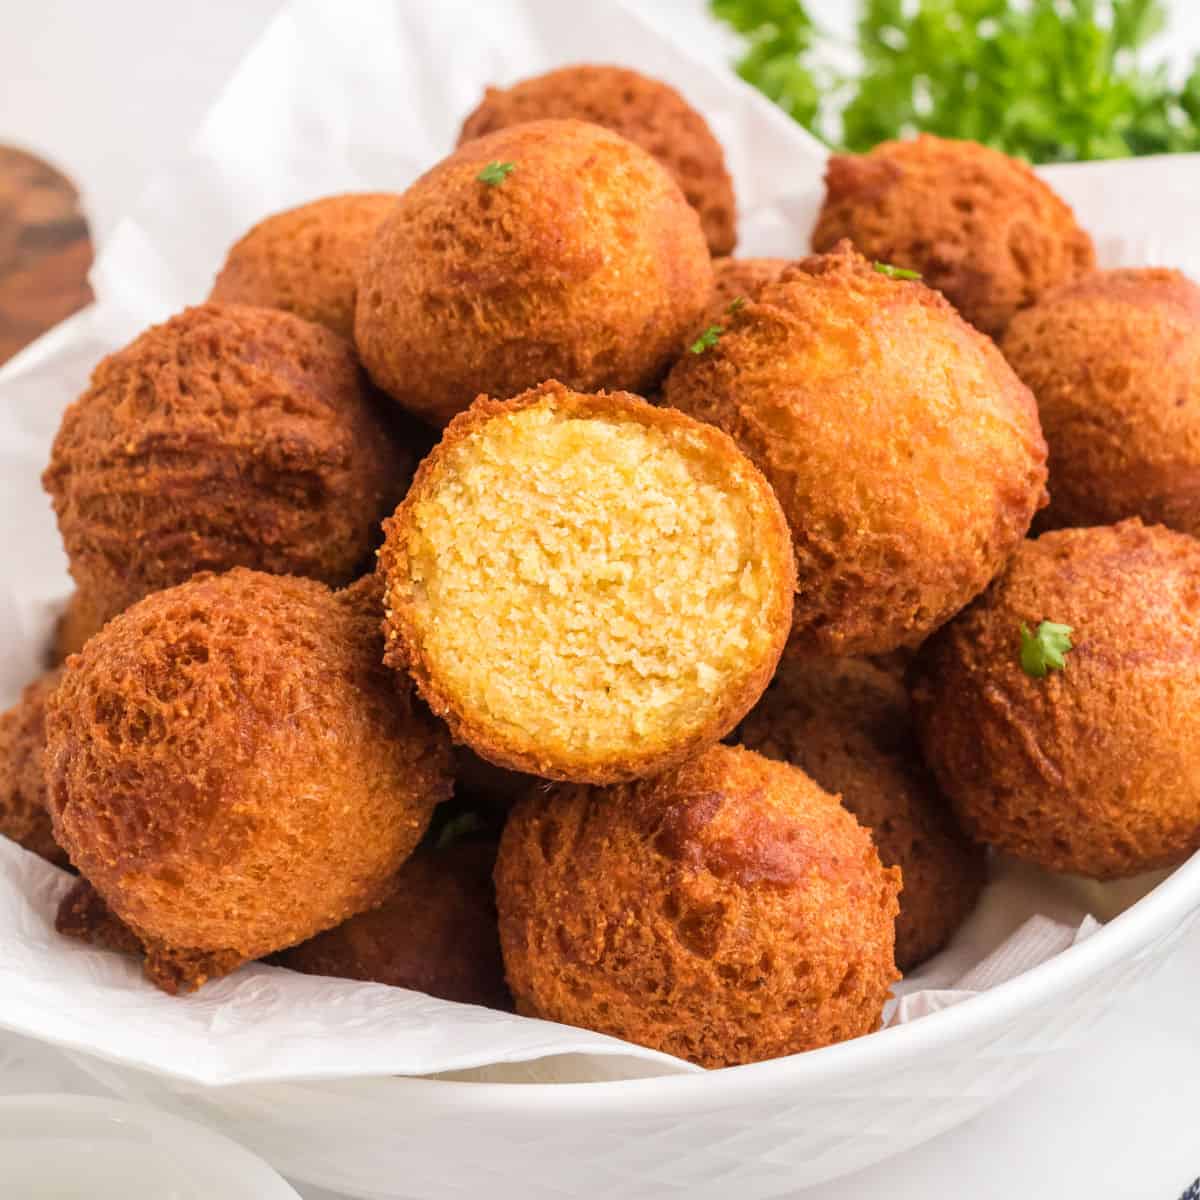 square image of hush puppies piled in a bowl with one cut in half to show the inside